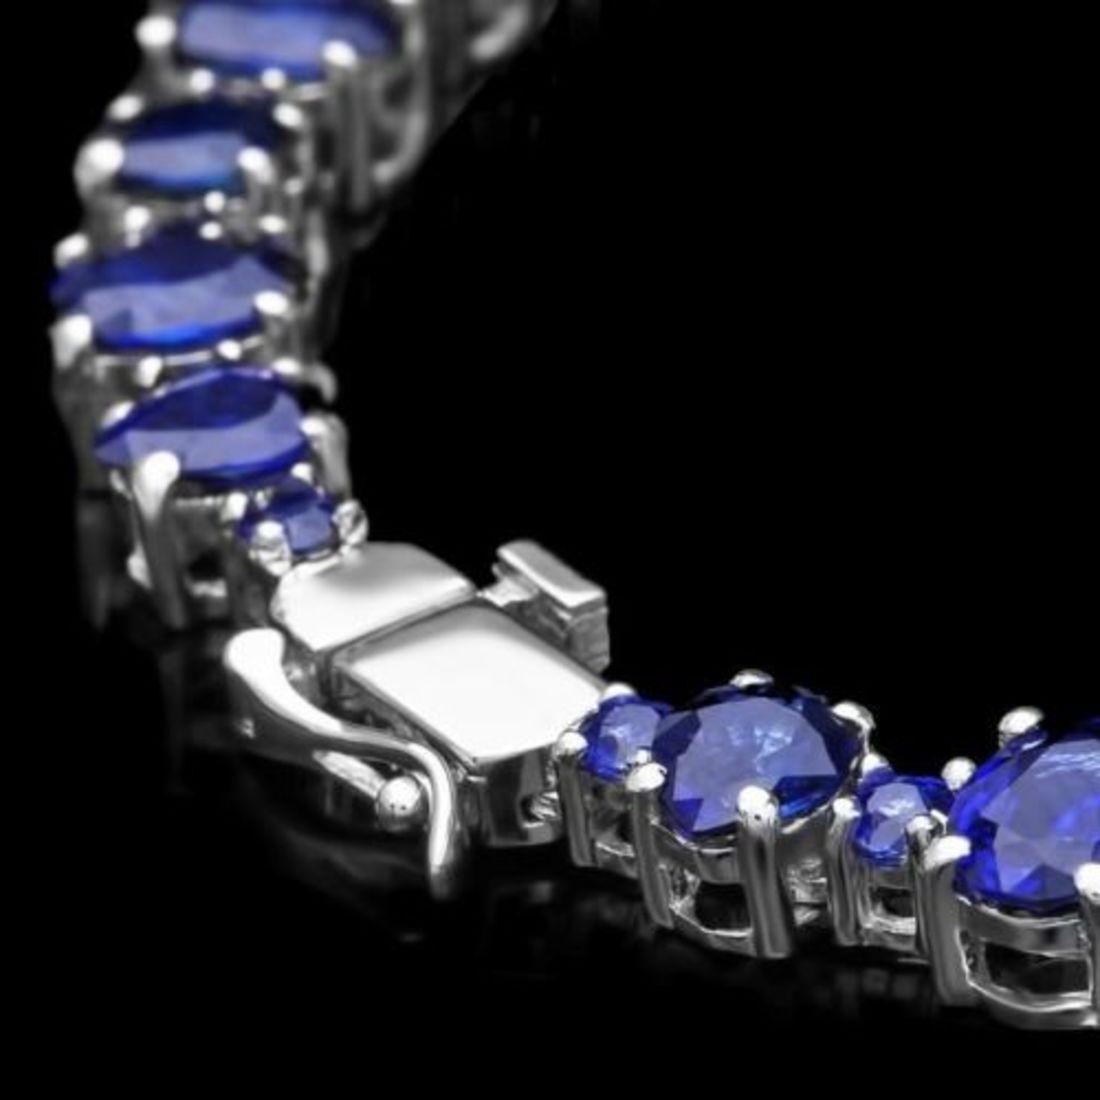 14K White Gold 47.50ct Sapphire and 1.85ct Diamond Necklace